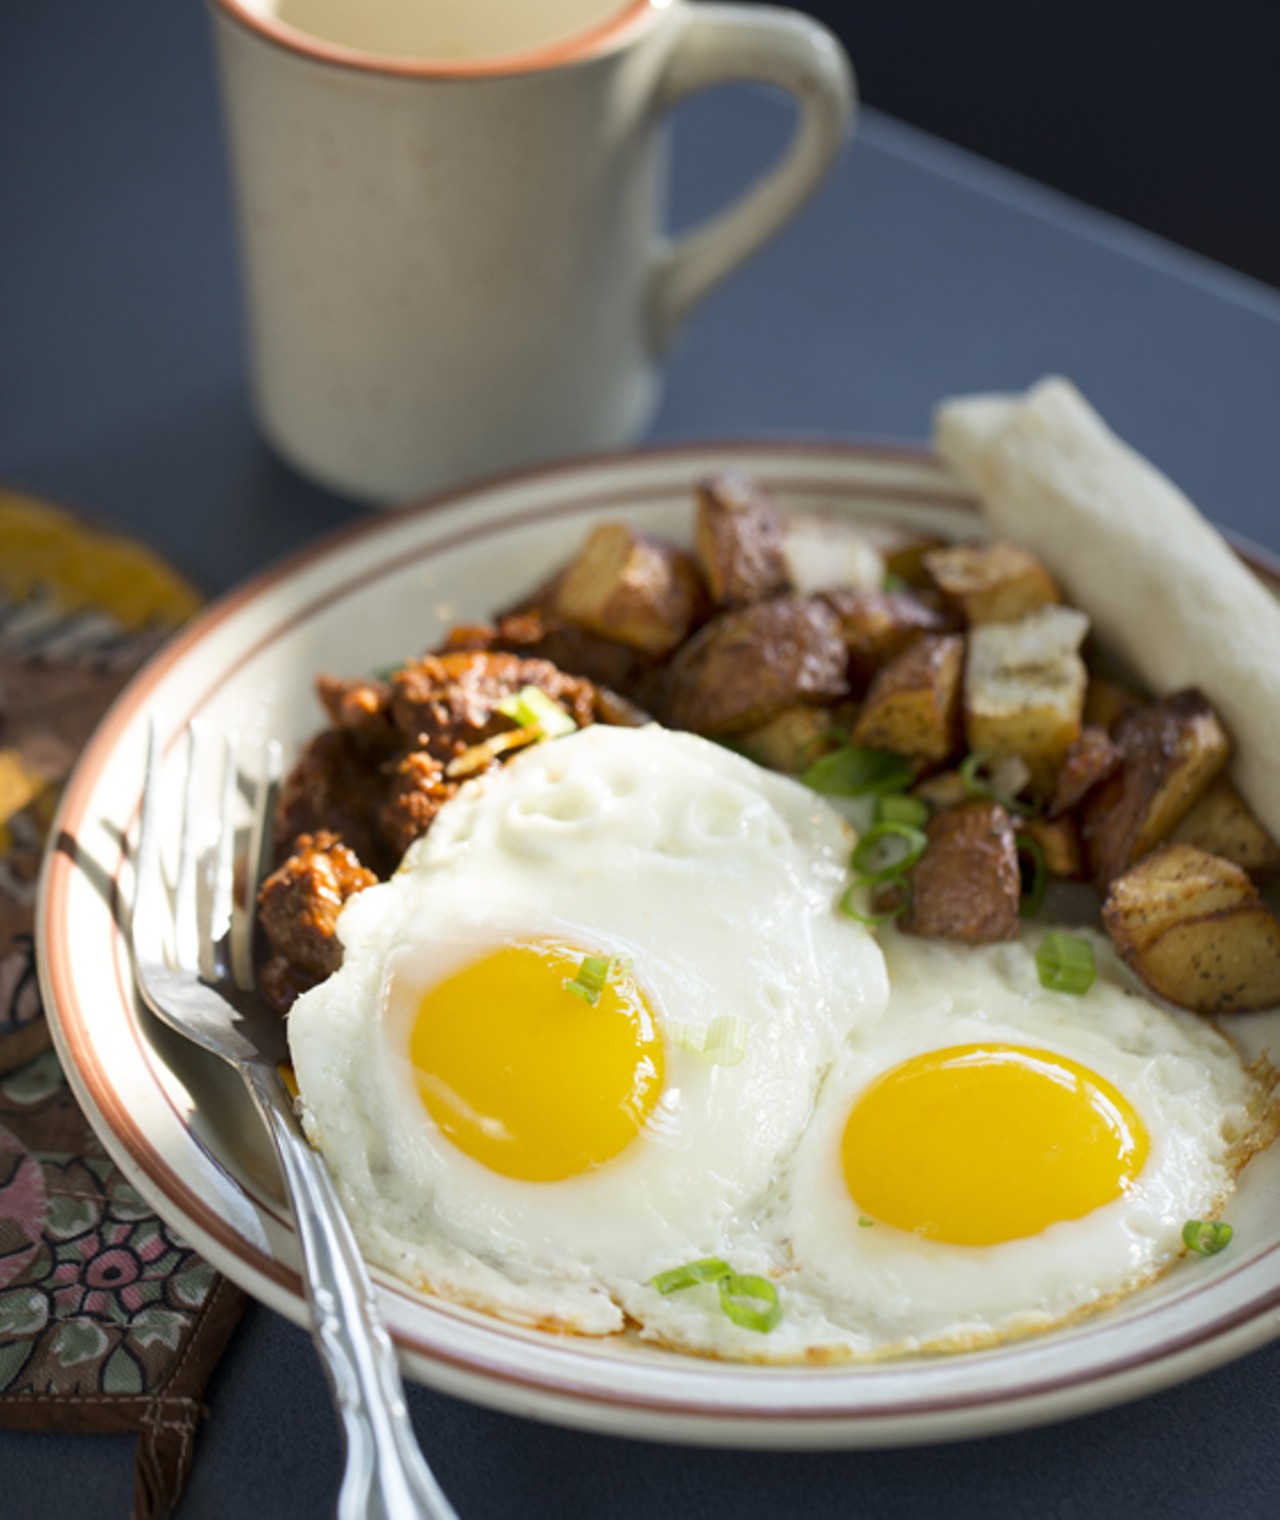 Carne Adovada - red chile marinated & braised pork served with two eggs any style (sunny side up shown here), home fries and tortillas.